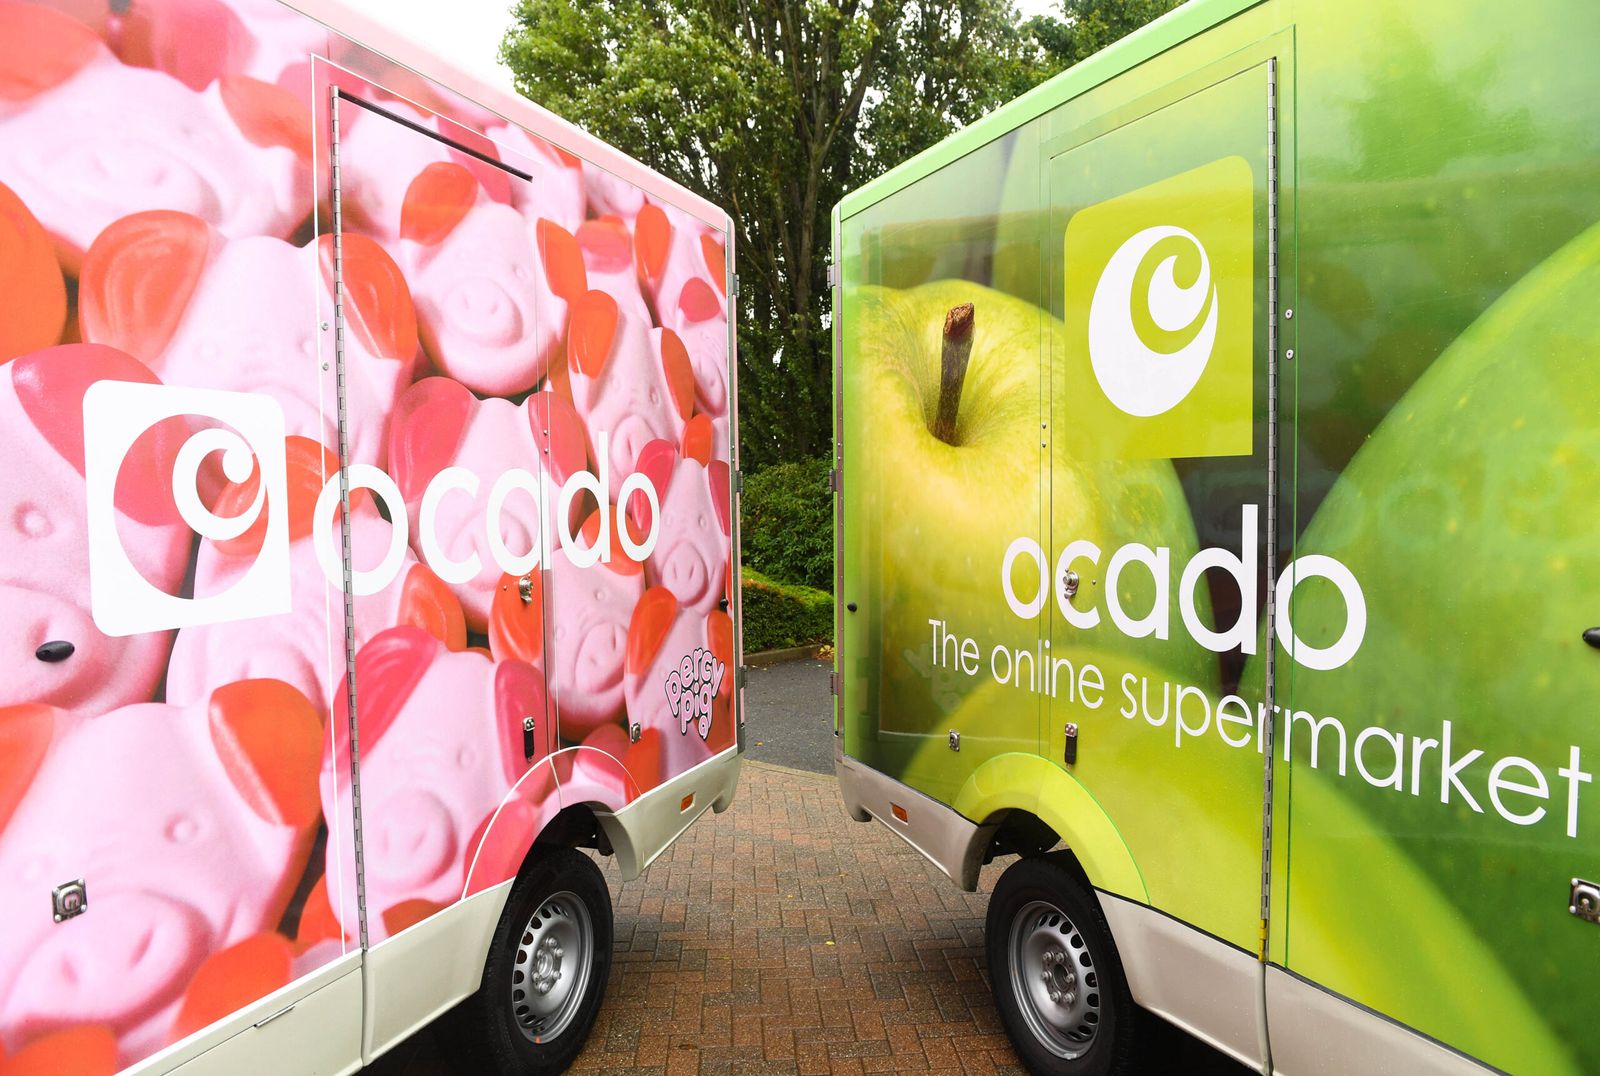 Retail specialist law firm appointed by Ocado Retail